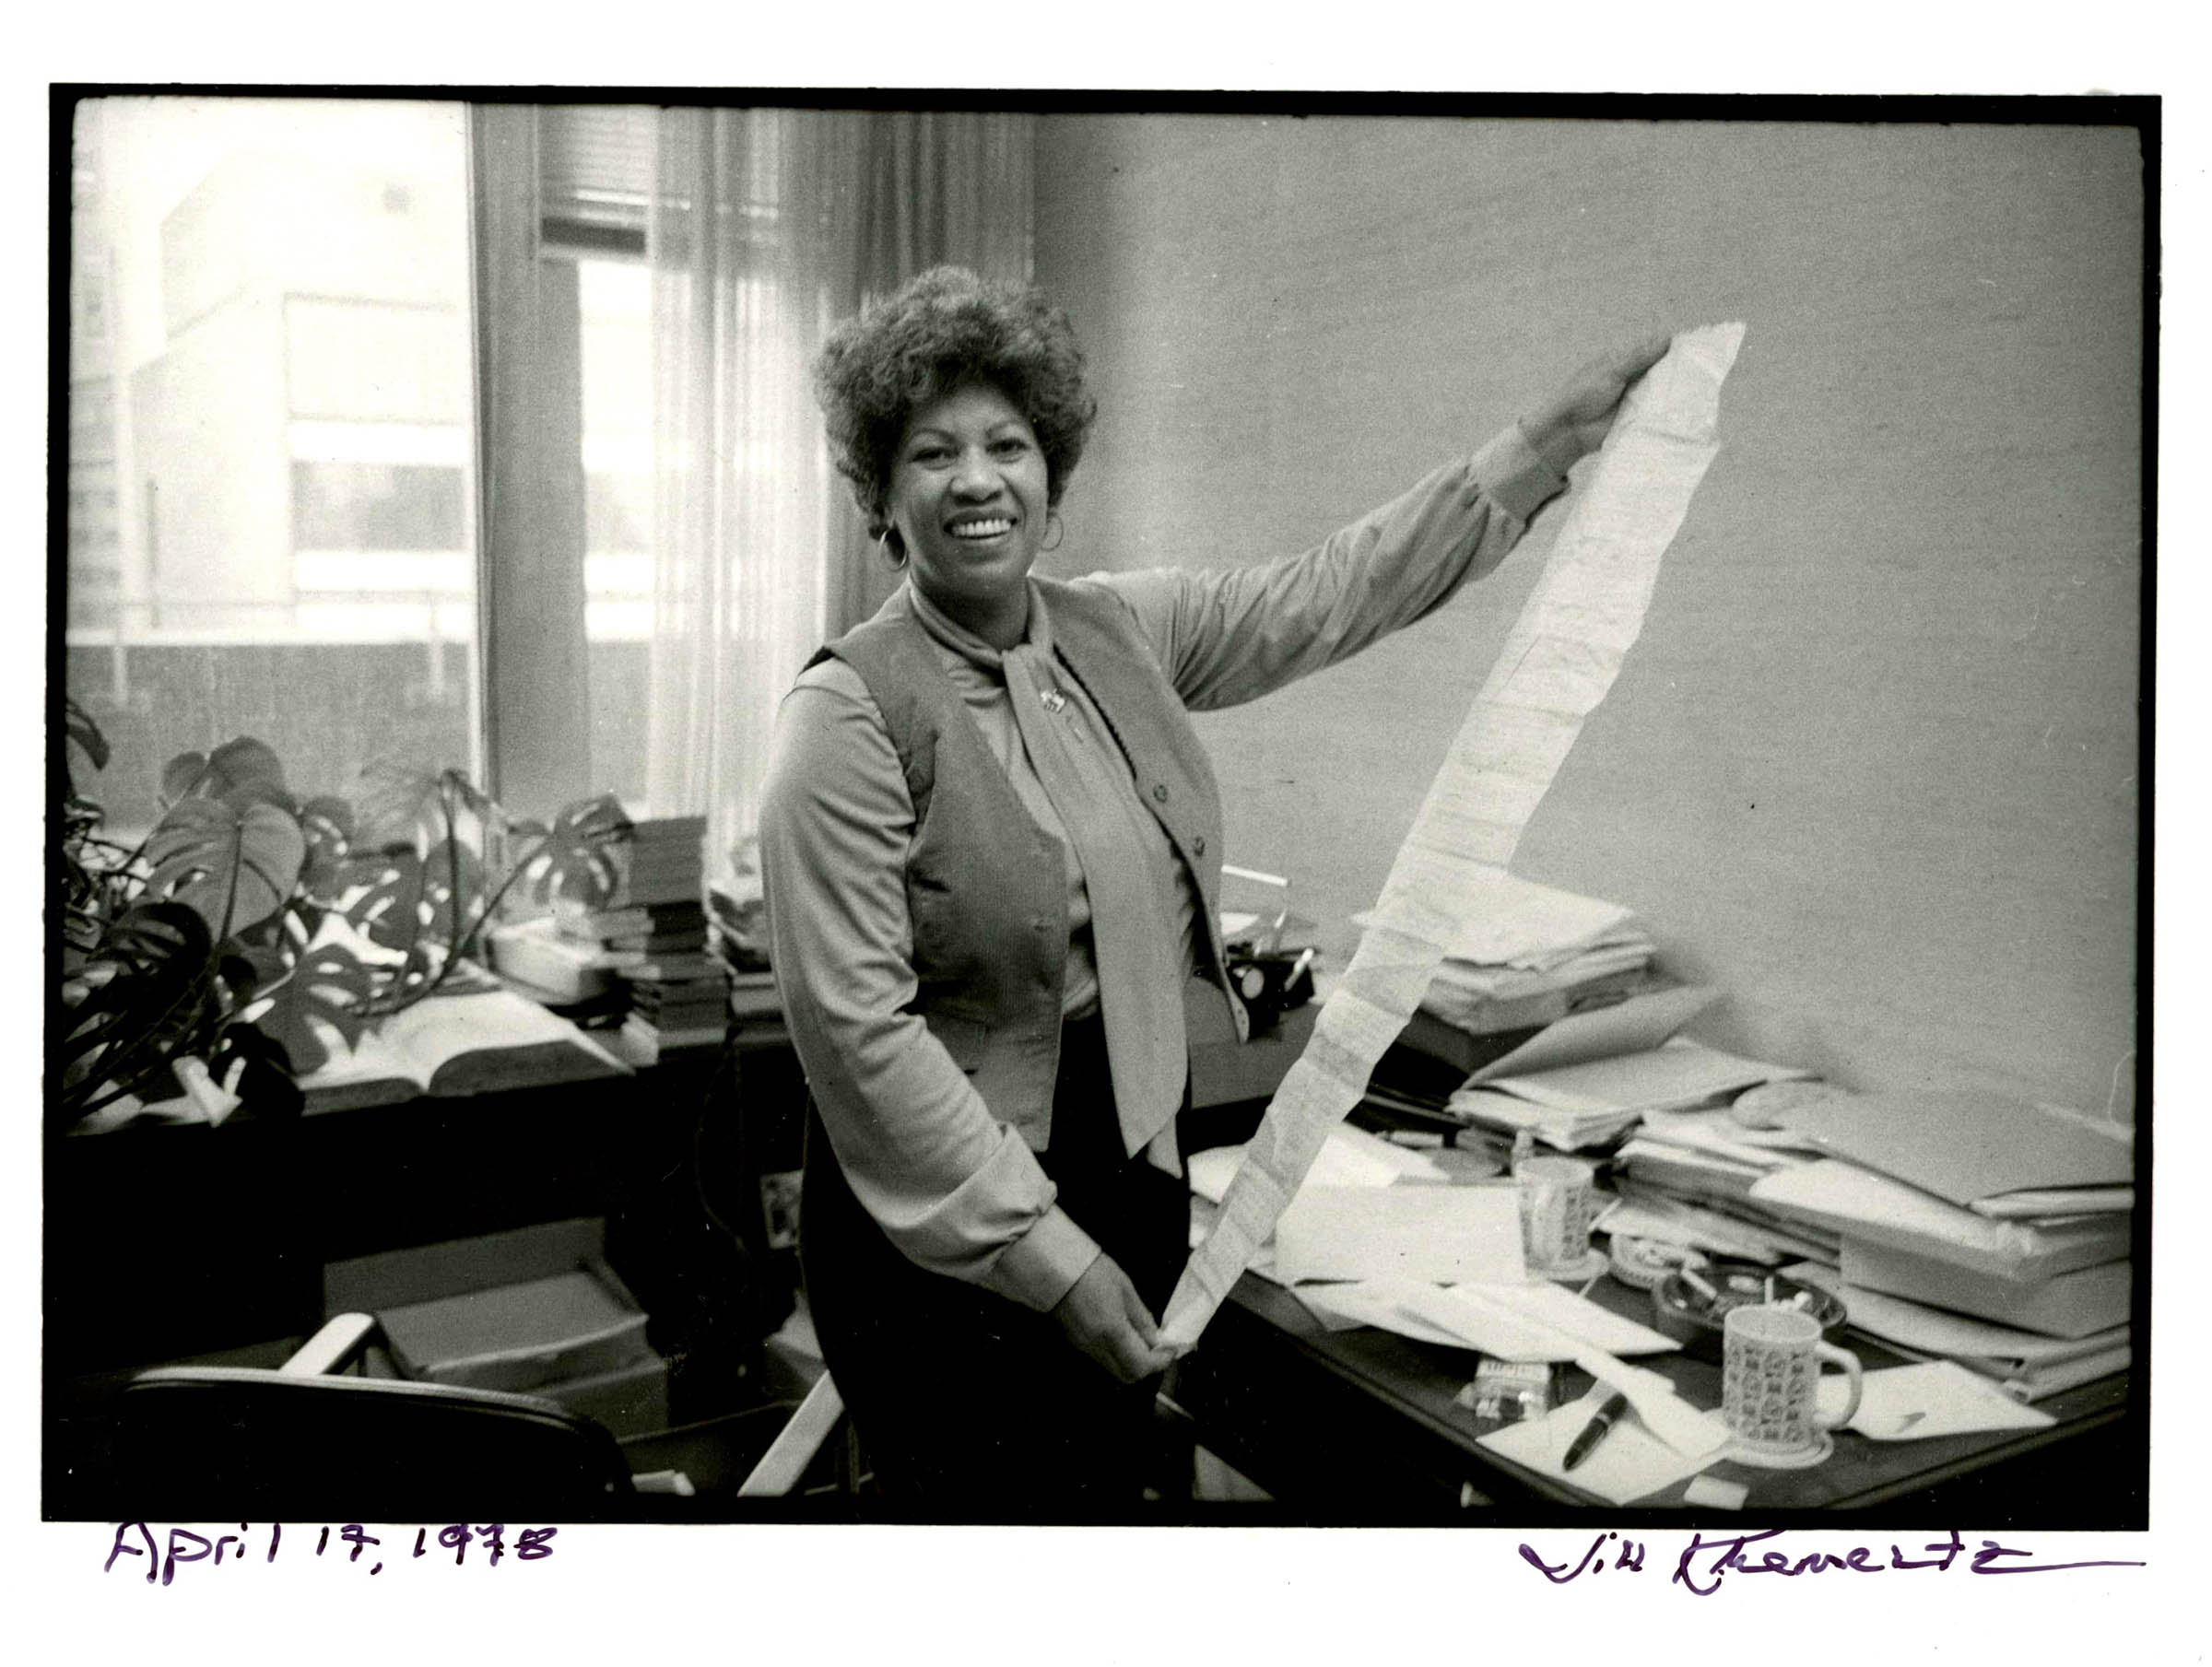 Morrison, in her office at Random House where she worked as an editor, on April 14, 1978. (Photograph © by Jill Krementz; All Rights Reserved.)